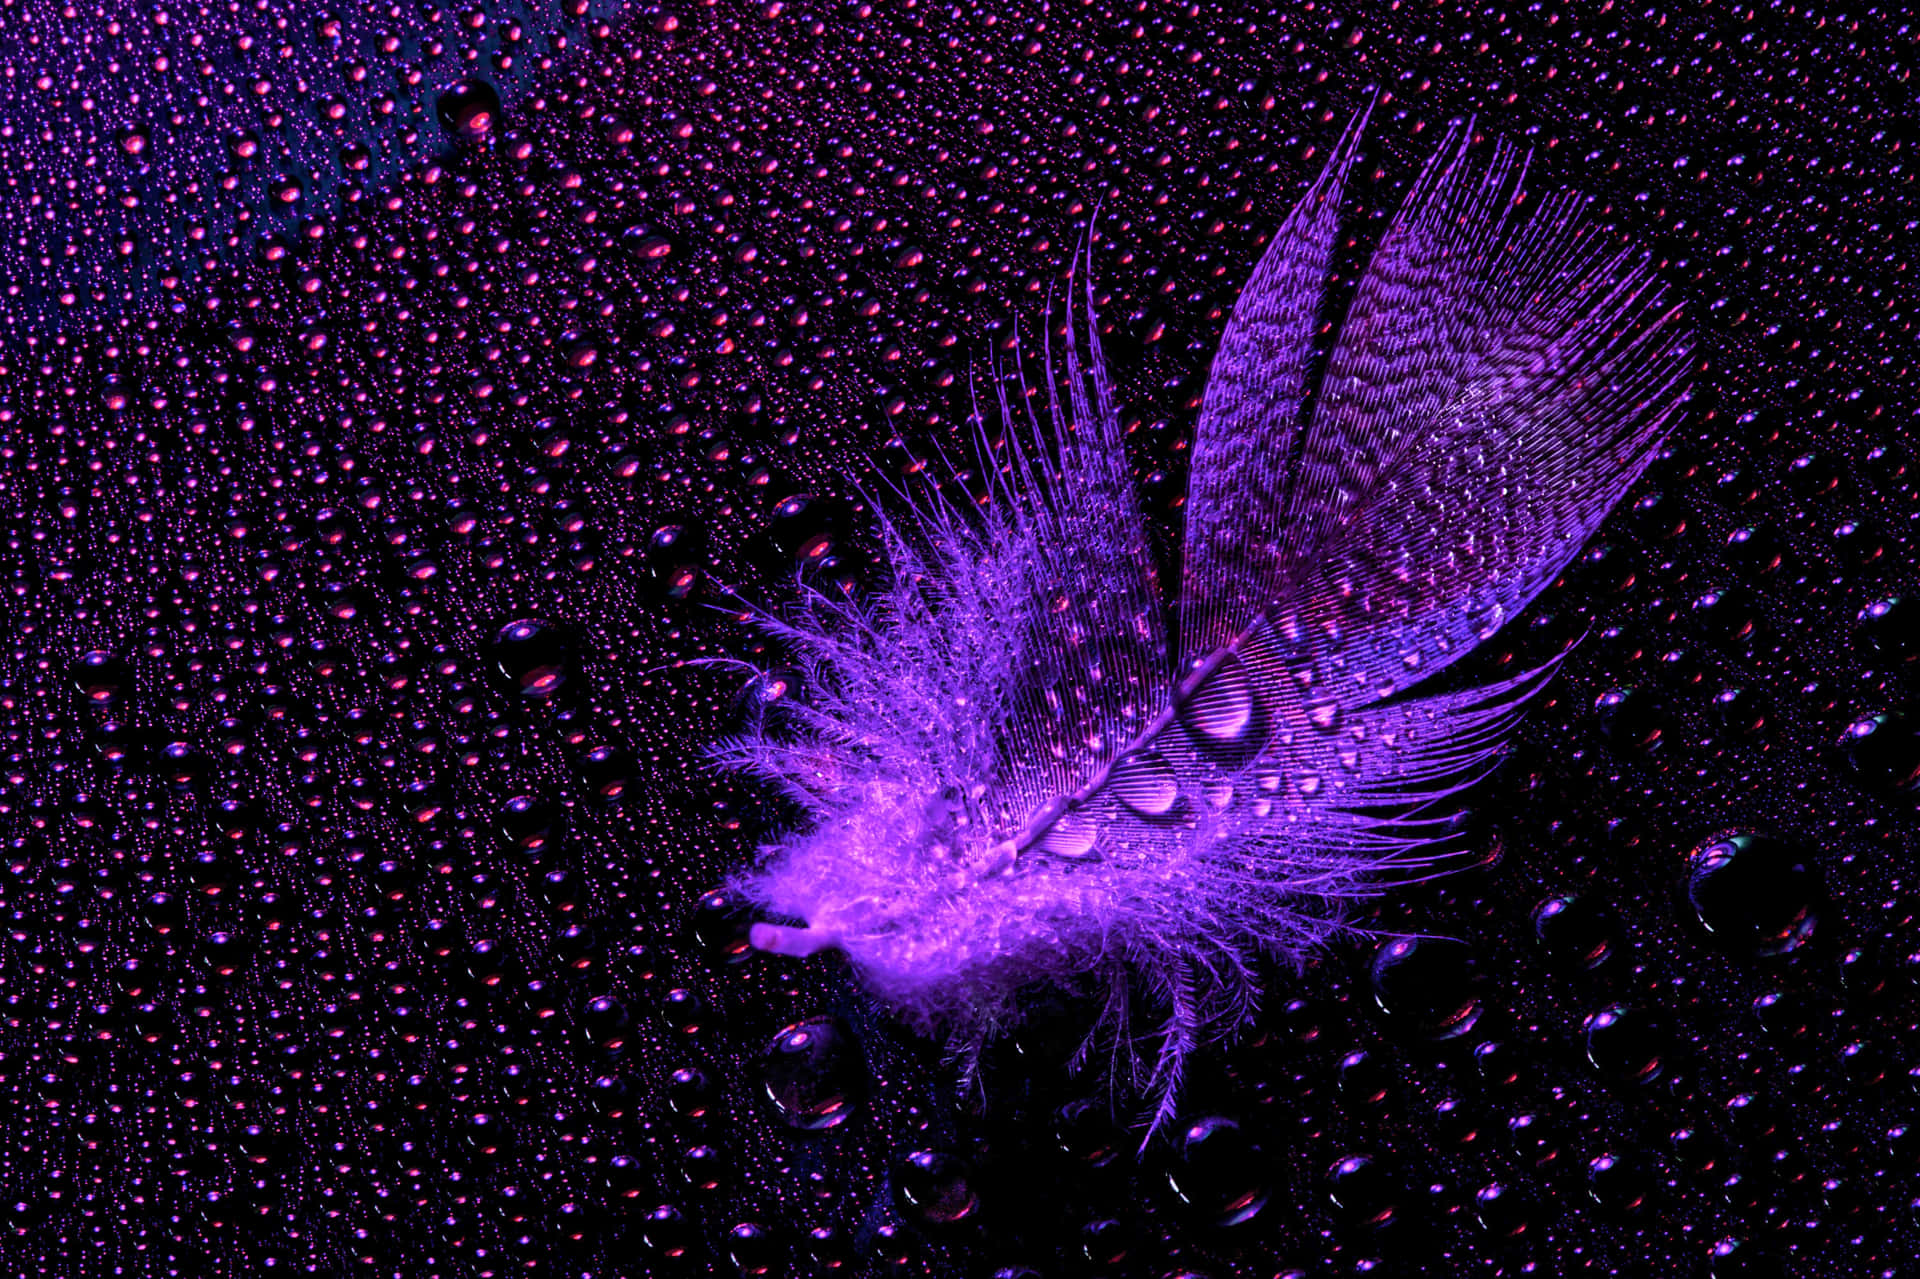 100+] Purple Feathers Wallpapers